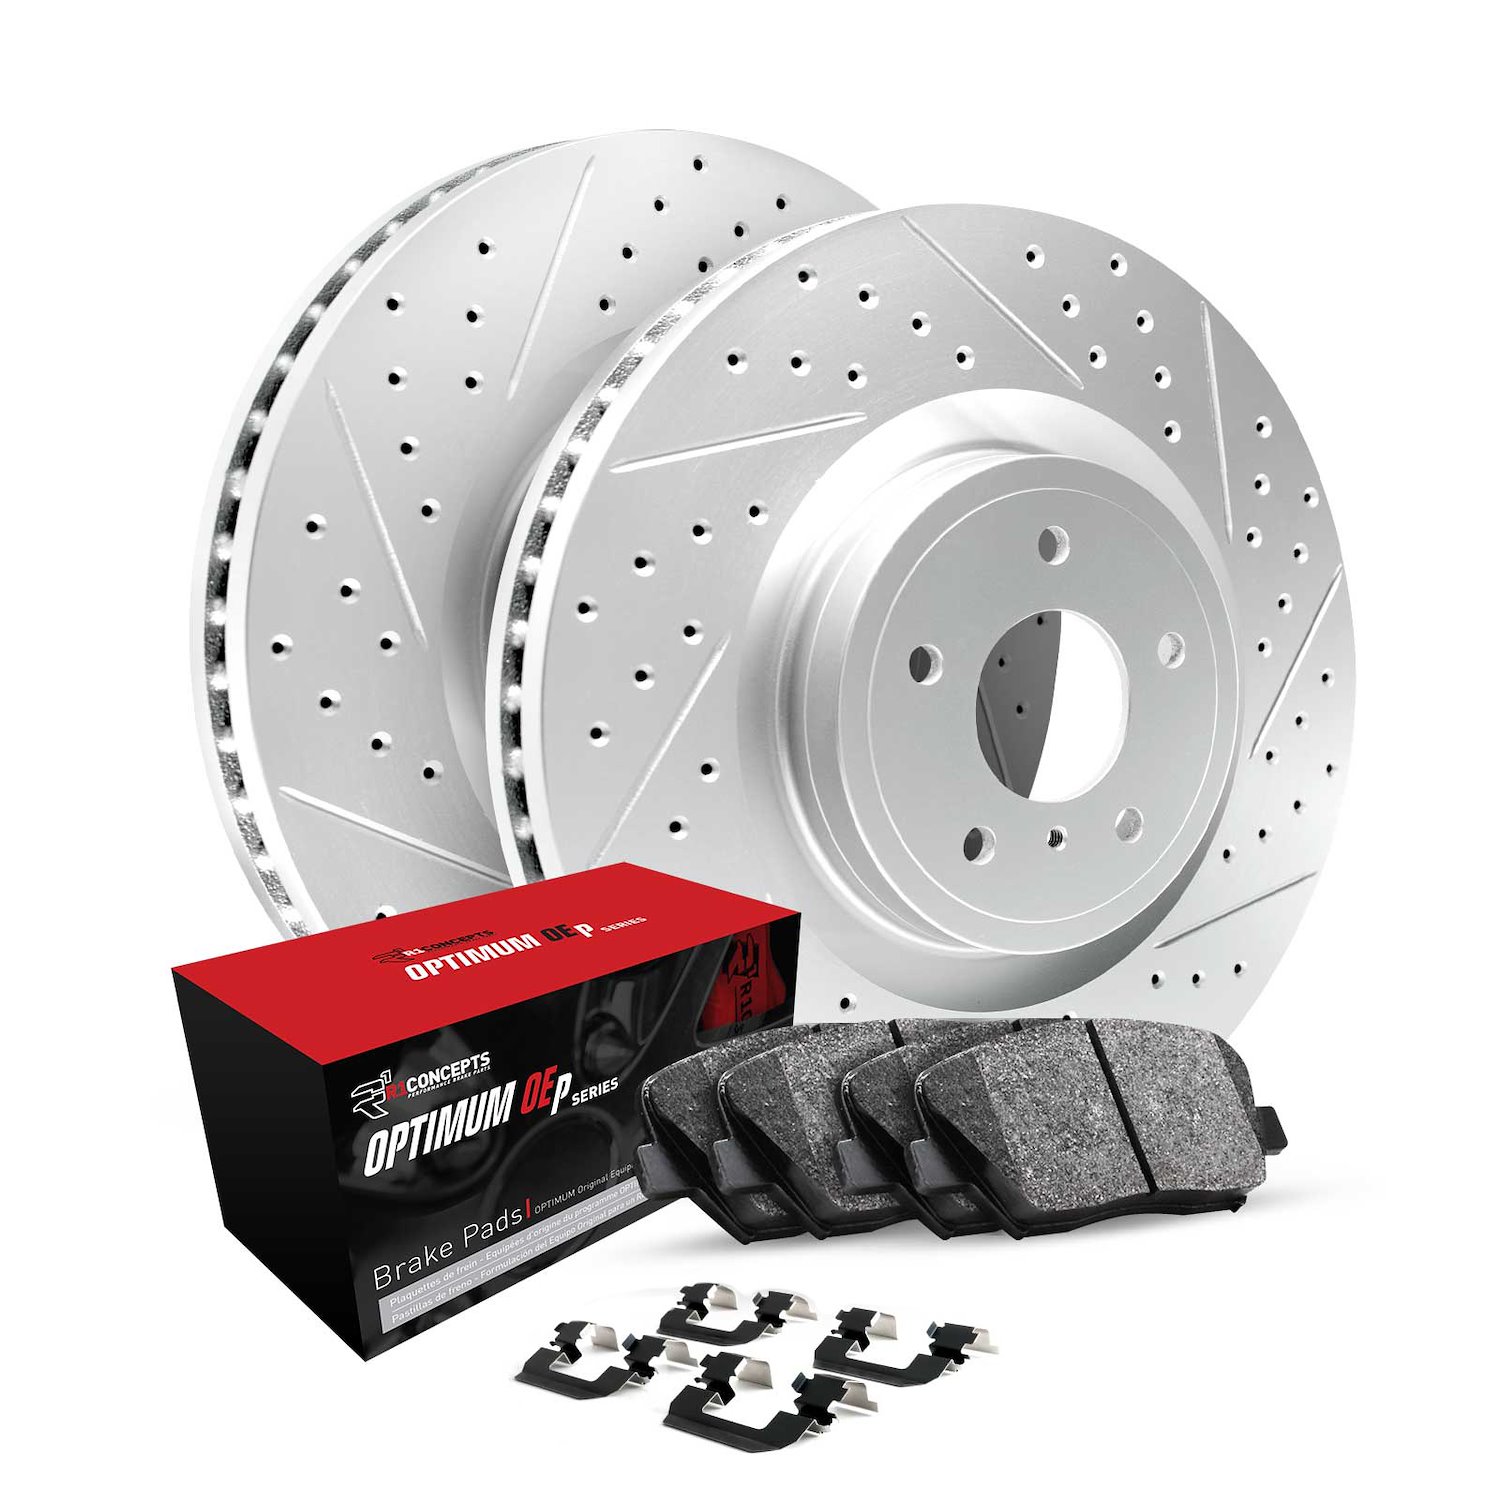 GEO-Carbon Drilled & Slotted Brake Rotor Set w/Optimum OE Pads & Hardware, 2009-2014 Fits Multiple Makes/Models, Position: Rear